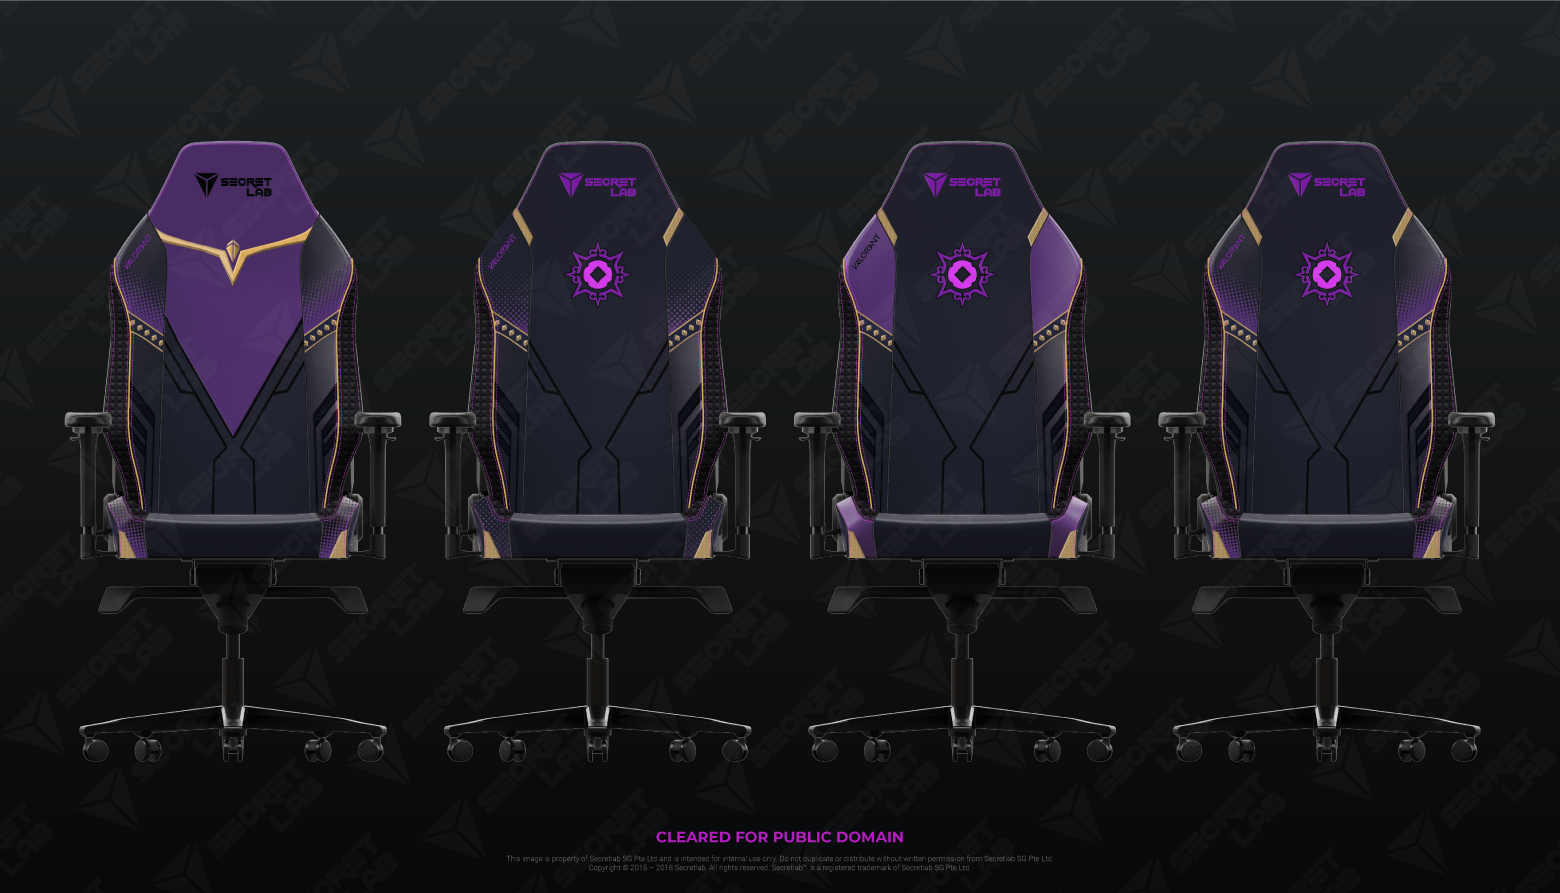 The design of the Reyna Edition gaming chair